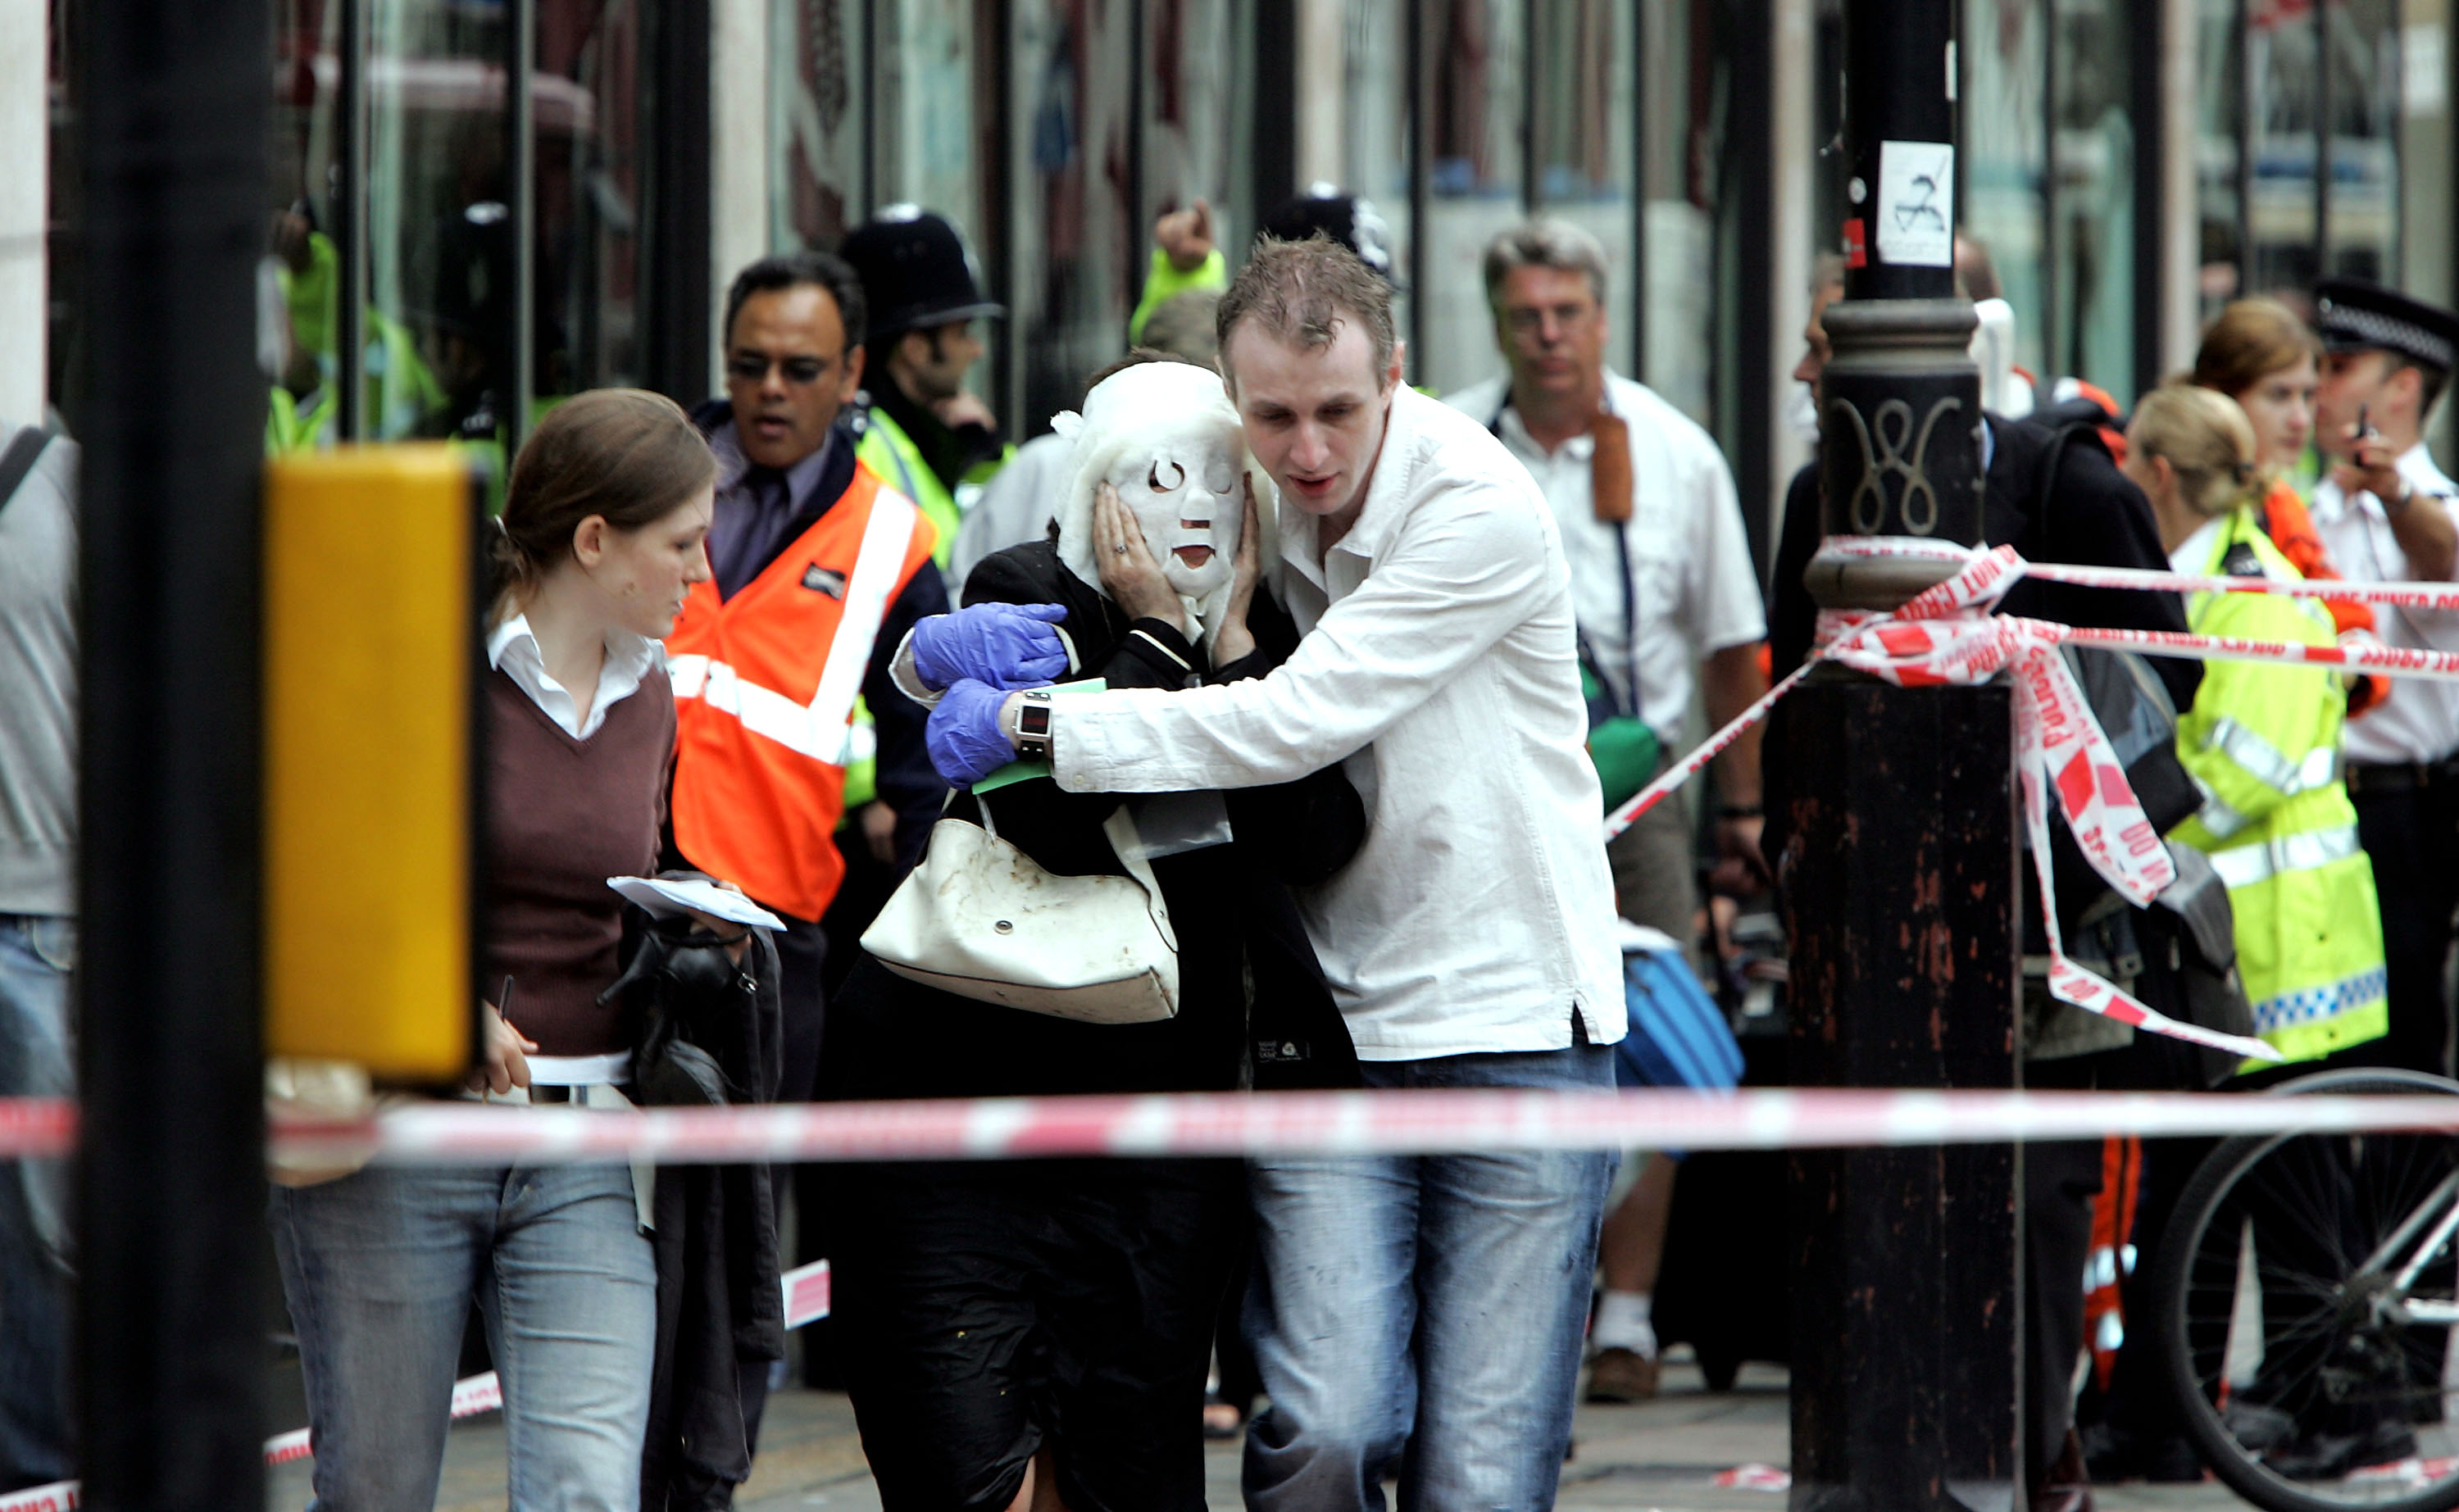 Survivors run to safety after bombs go off                         on the subway and a bus in London on July 7, 2005